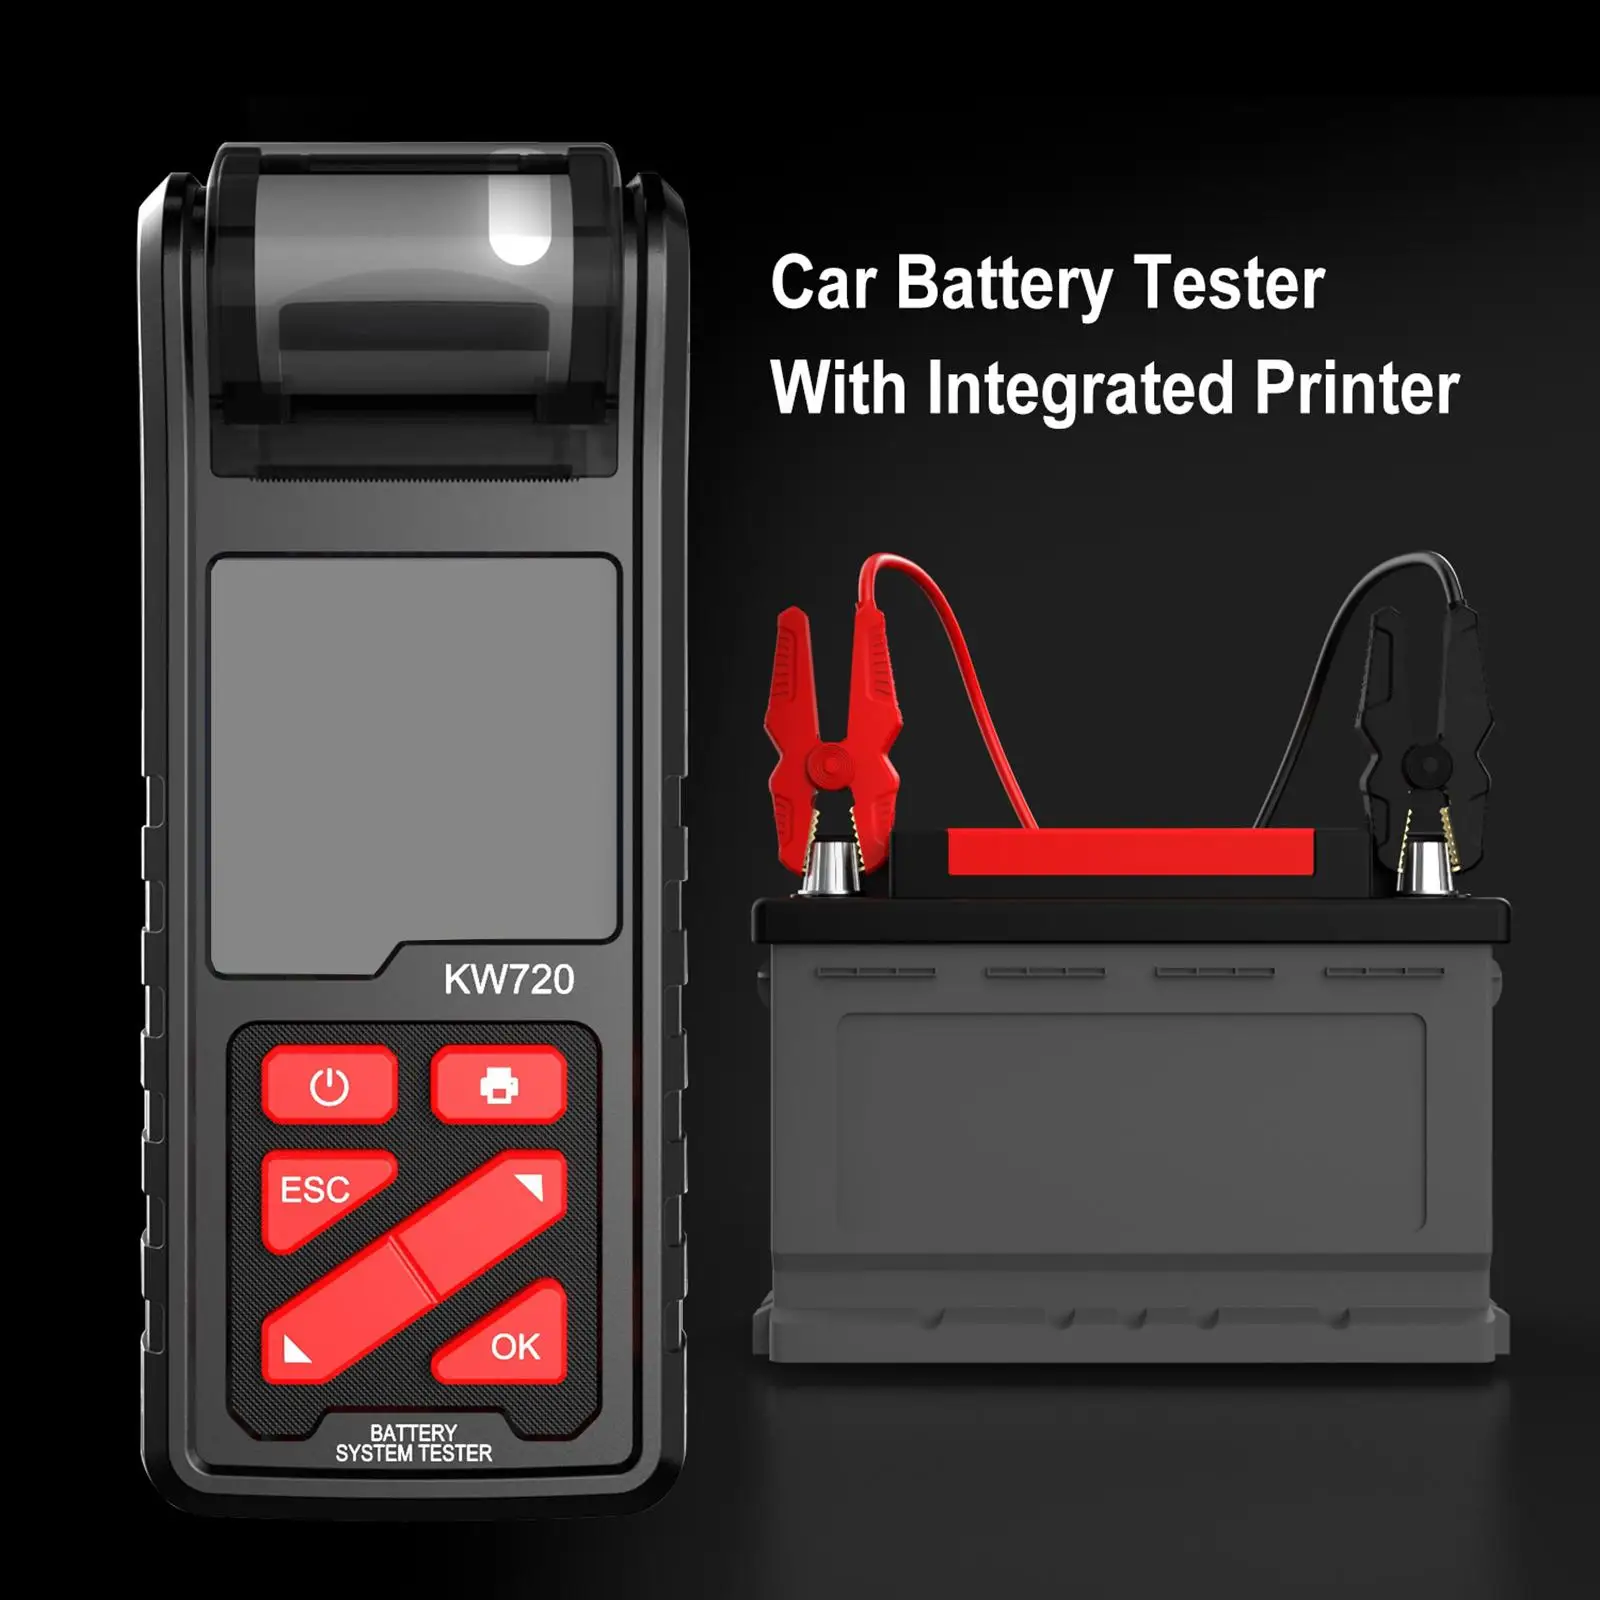 KW720 Car Battery Tester with Print Function 6V 12V 24V Battery Health Analyzer for Vehicles Starting and Charging System